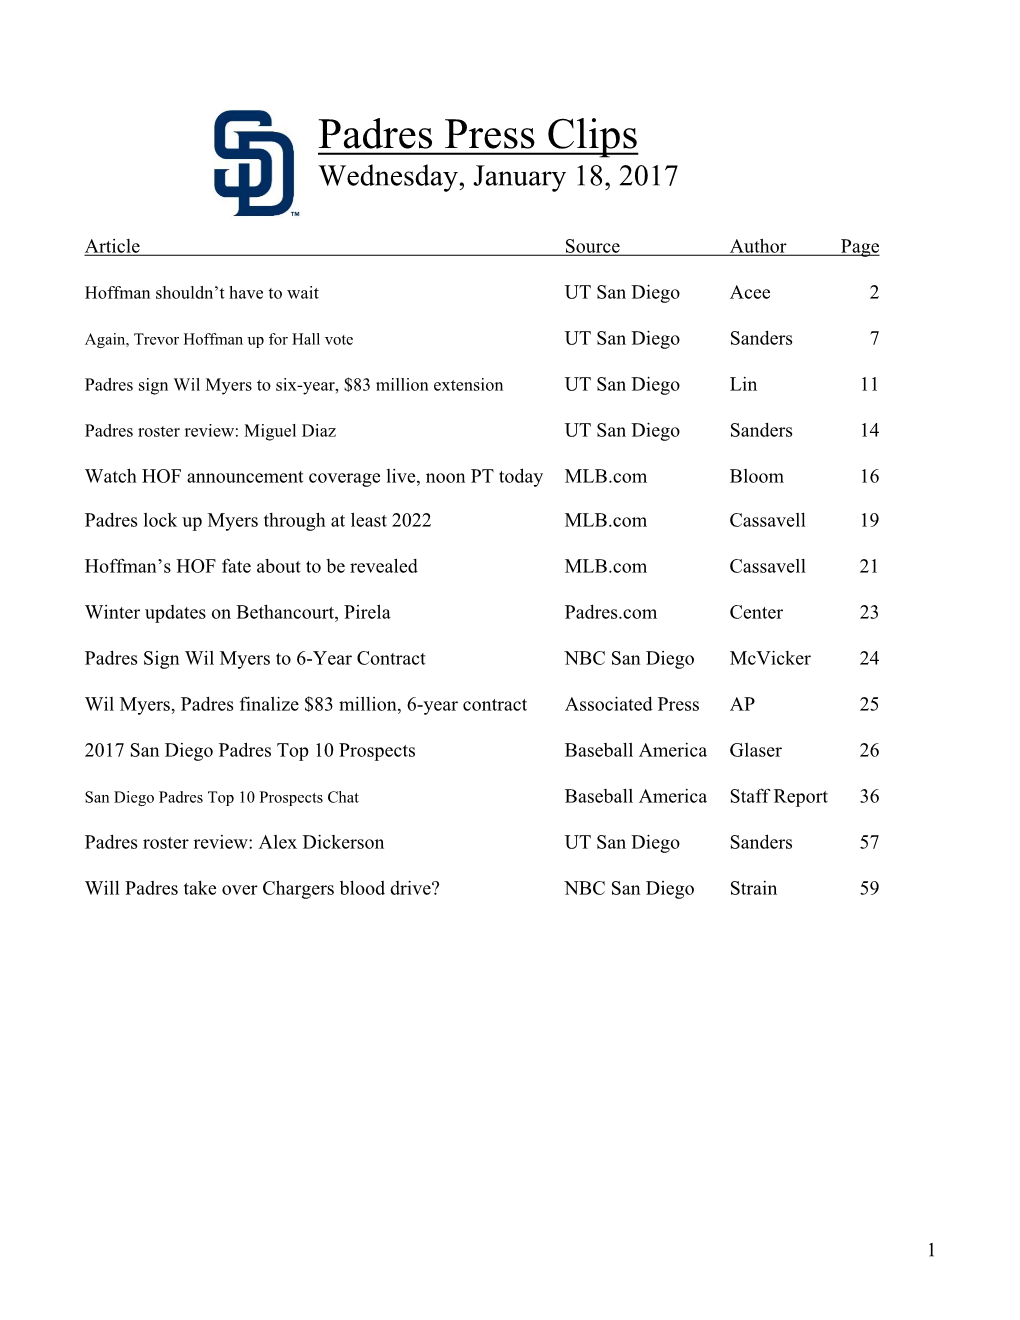 Padres Press Clips Wednesday, January 18, 2017